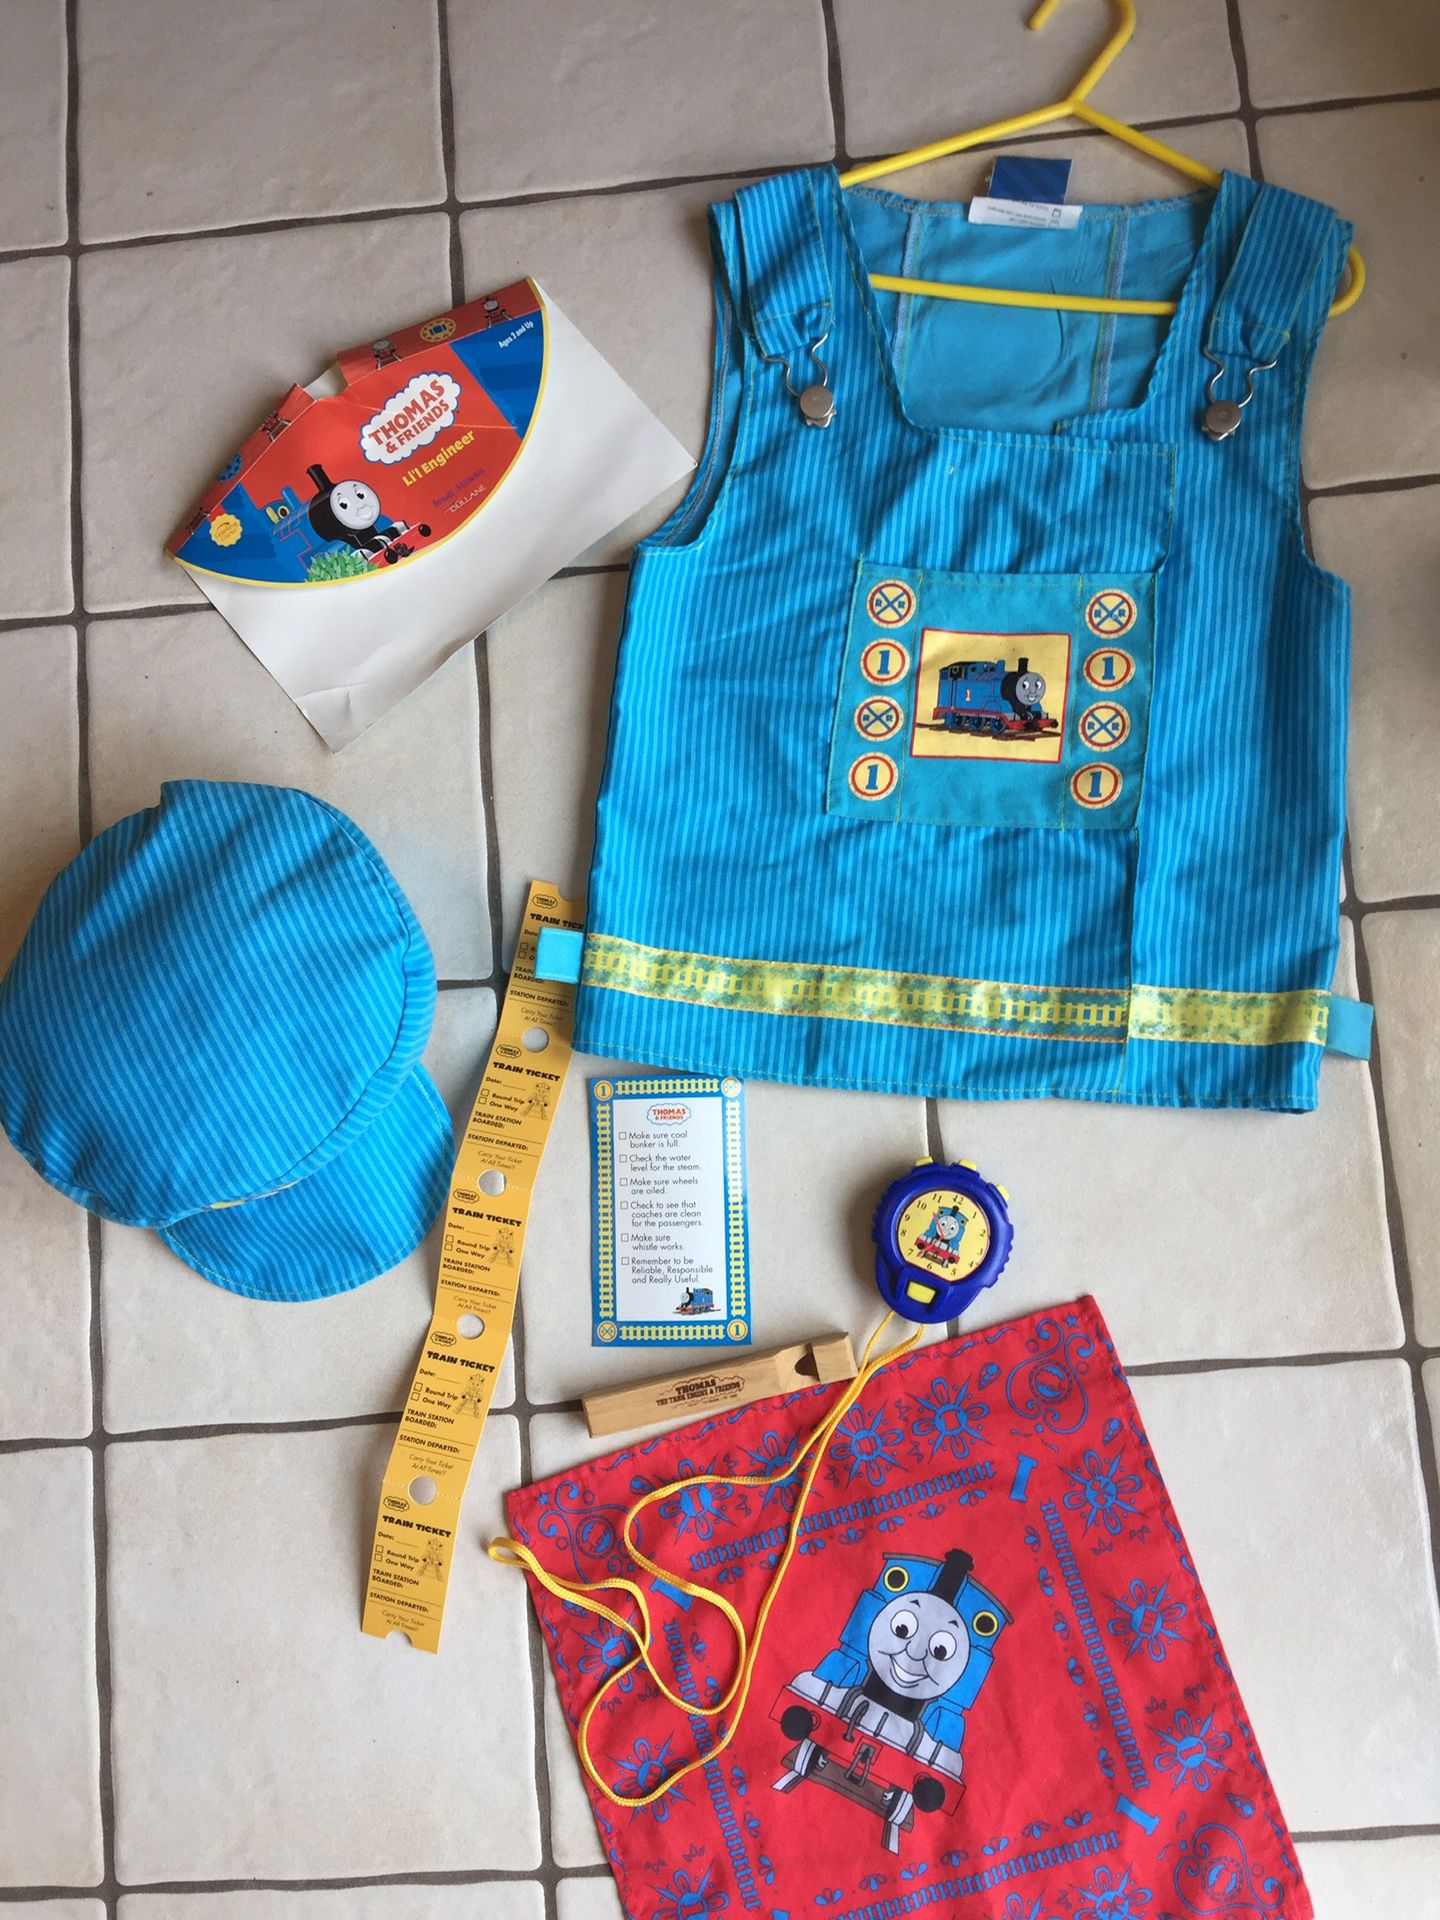 Thomas & Friends Li’l Engineer Outfit Costume w/ Accessories pictured